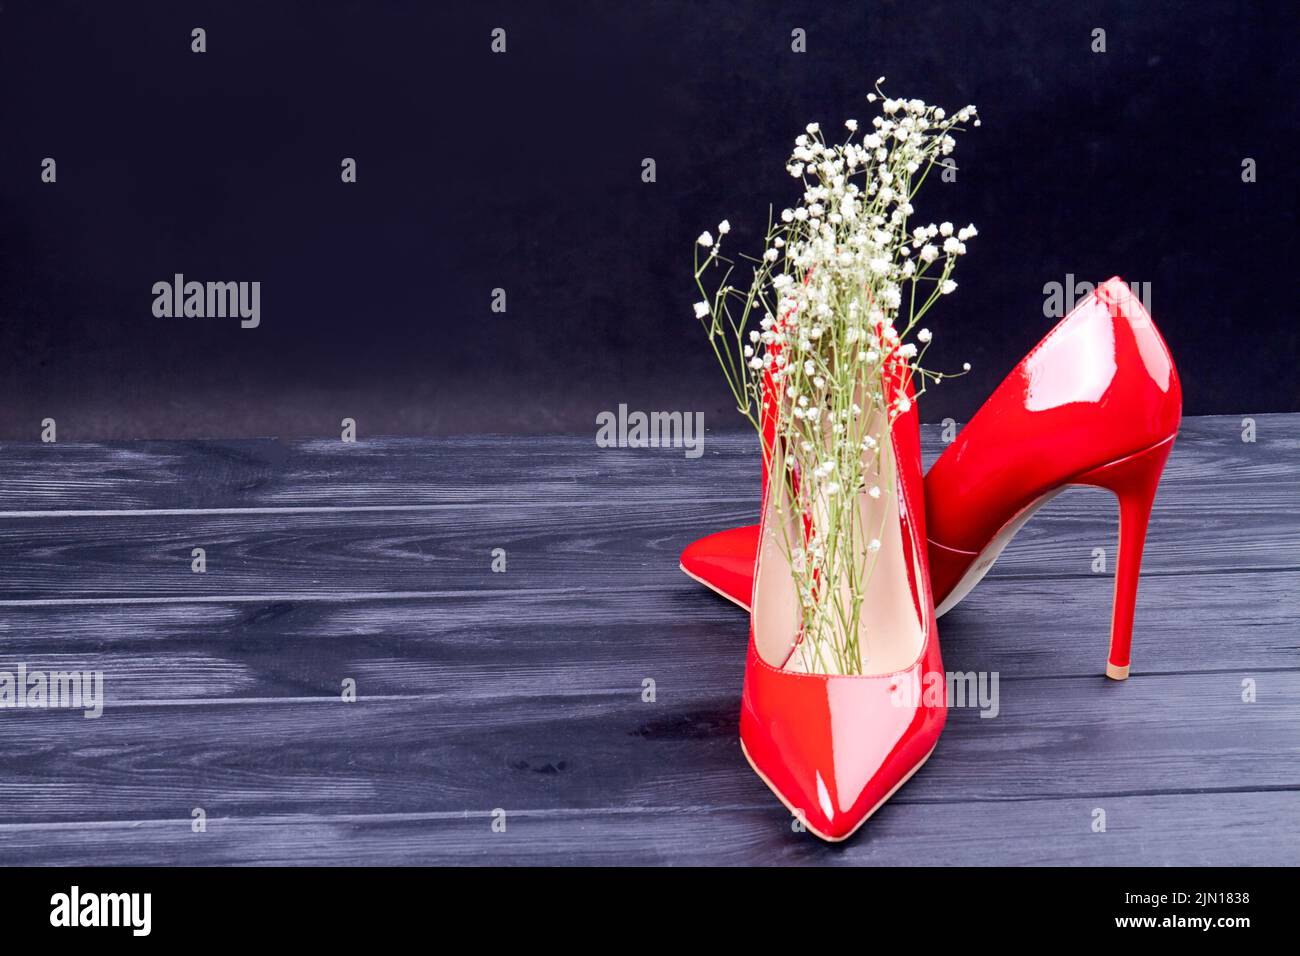 Pair of red high heel shoes with white flowers. Dark background with copy space. Stock Photo